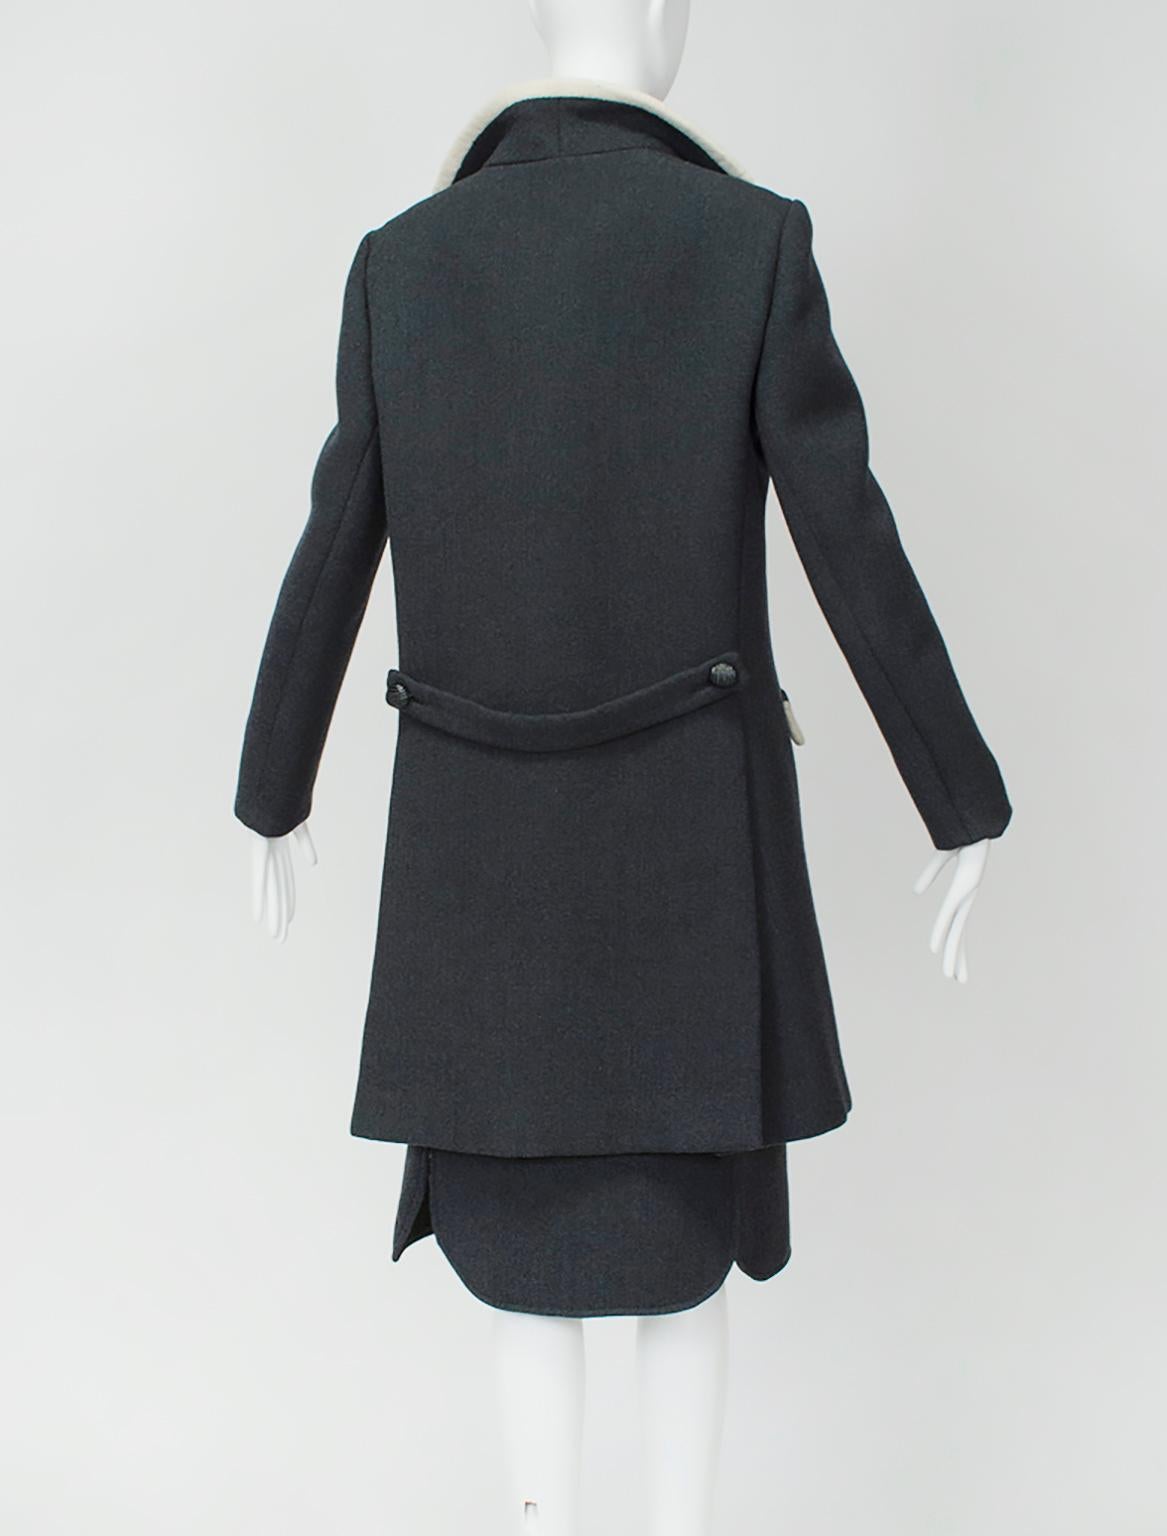 Gray B Zuckerman Mod Jackie O Charcoal Wool Contrast Coat and Skirt Set - M-L, 1960s For Sale